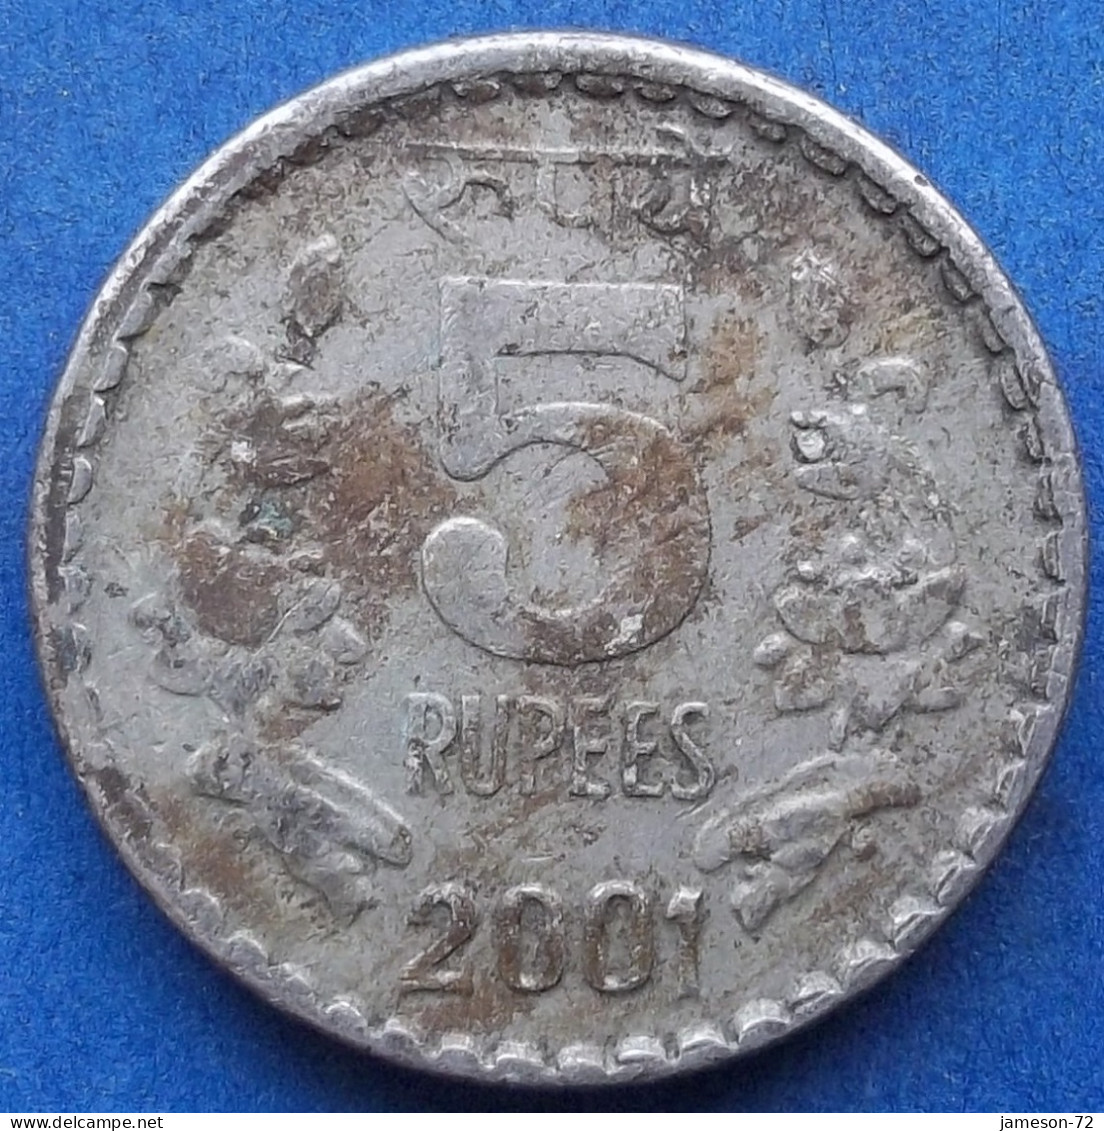 INDIA - 5 Rupees 2001 (C) "Lotus Flowers" KM# 154.2 Republic Decimal Coinage (1957) - Edelweiss Coins - Georgien